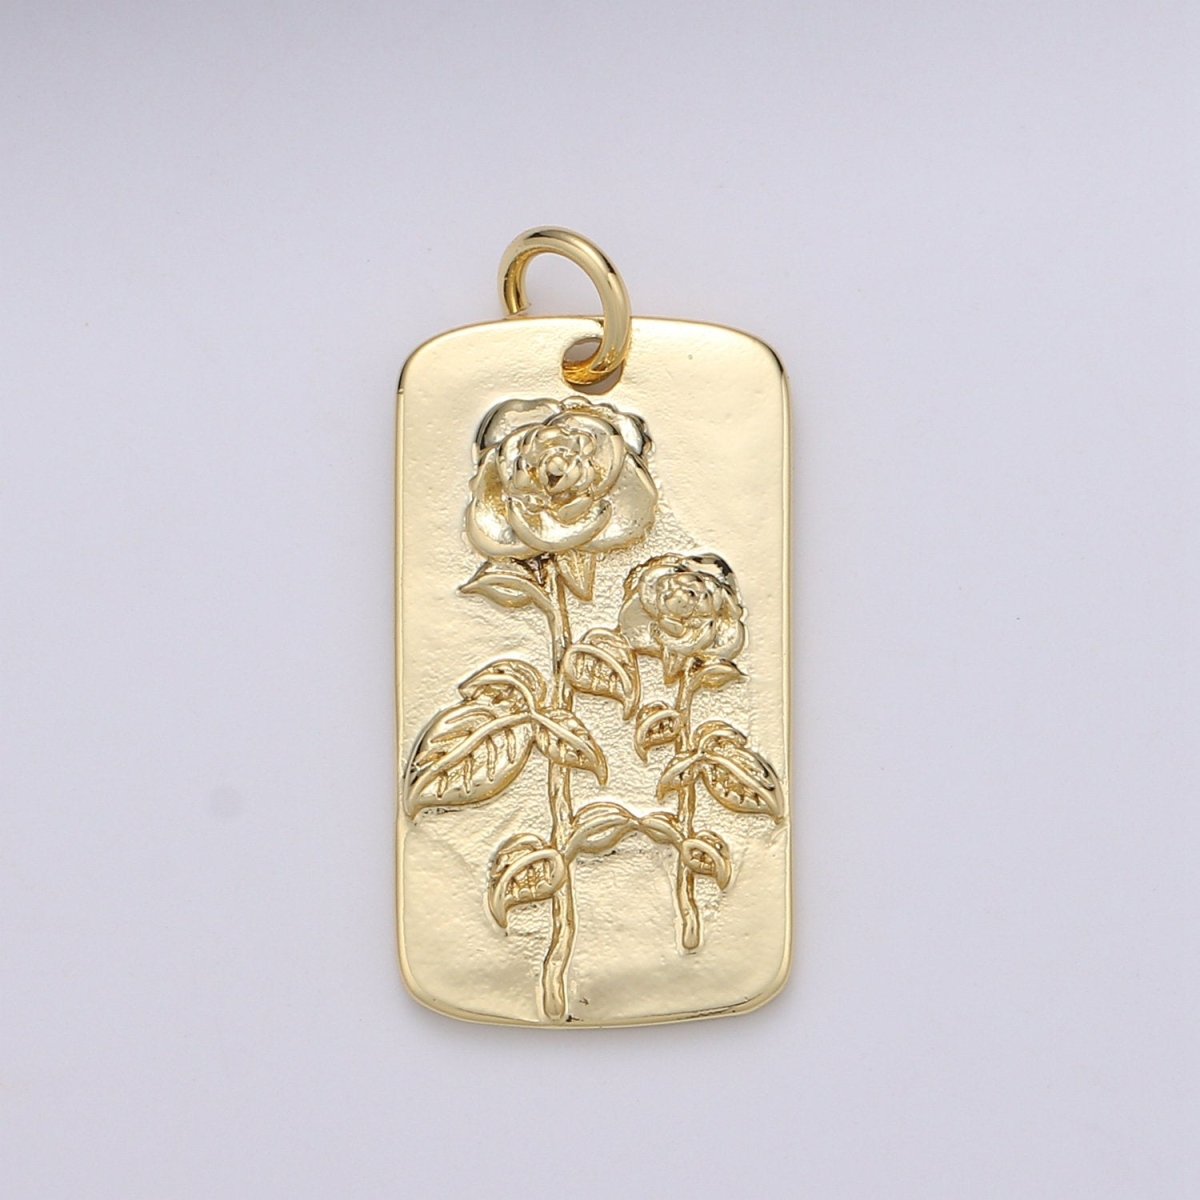 Rose Charms, Gold Rose Pendant, Dainty Rose Charm, Small Rose Charm for Necklace Floral Flower Jewelry in 14k gold filled D-750 - DLUXCA